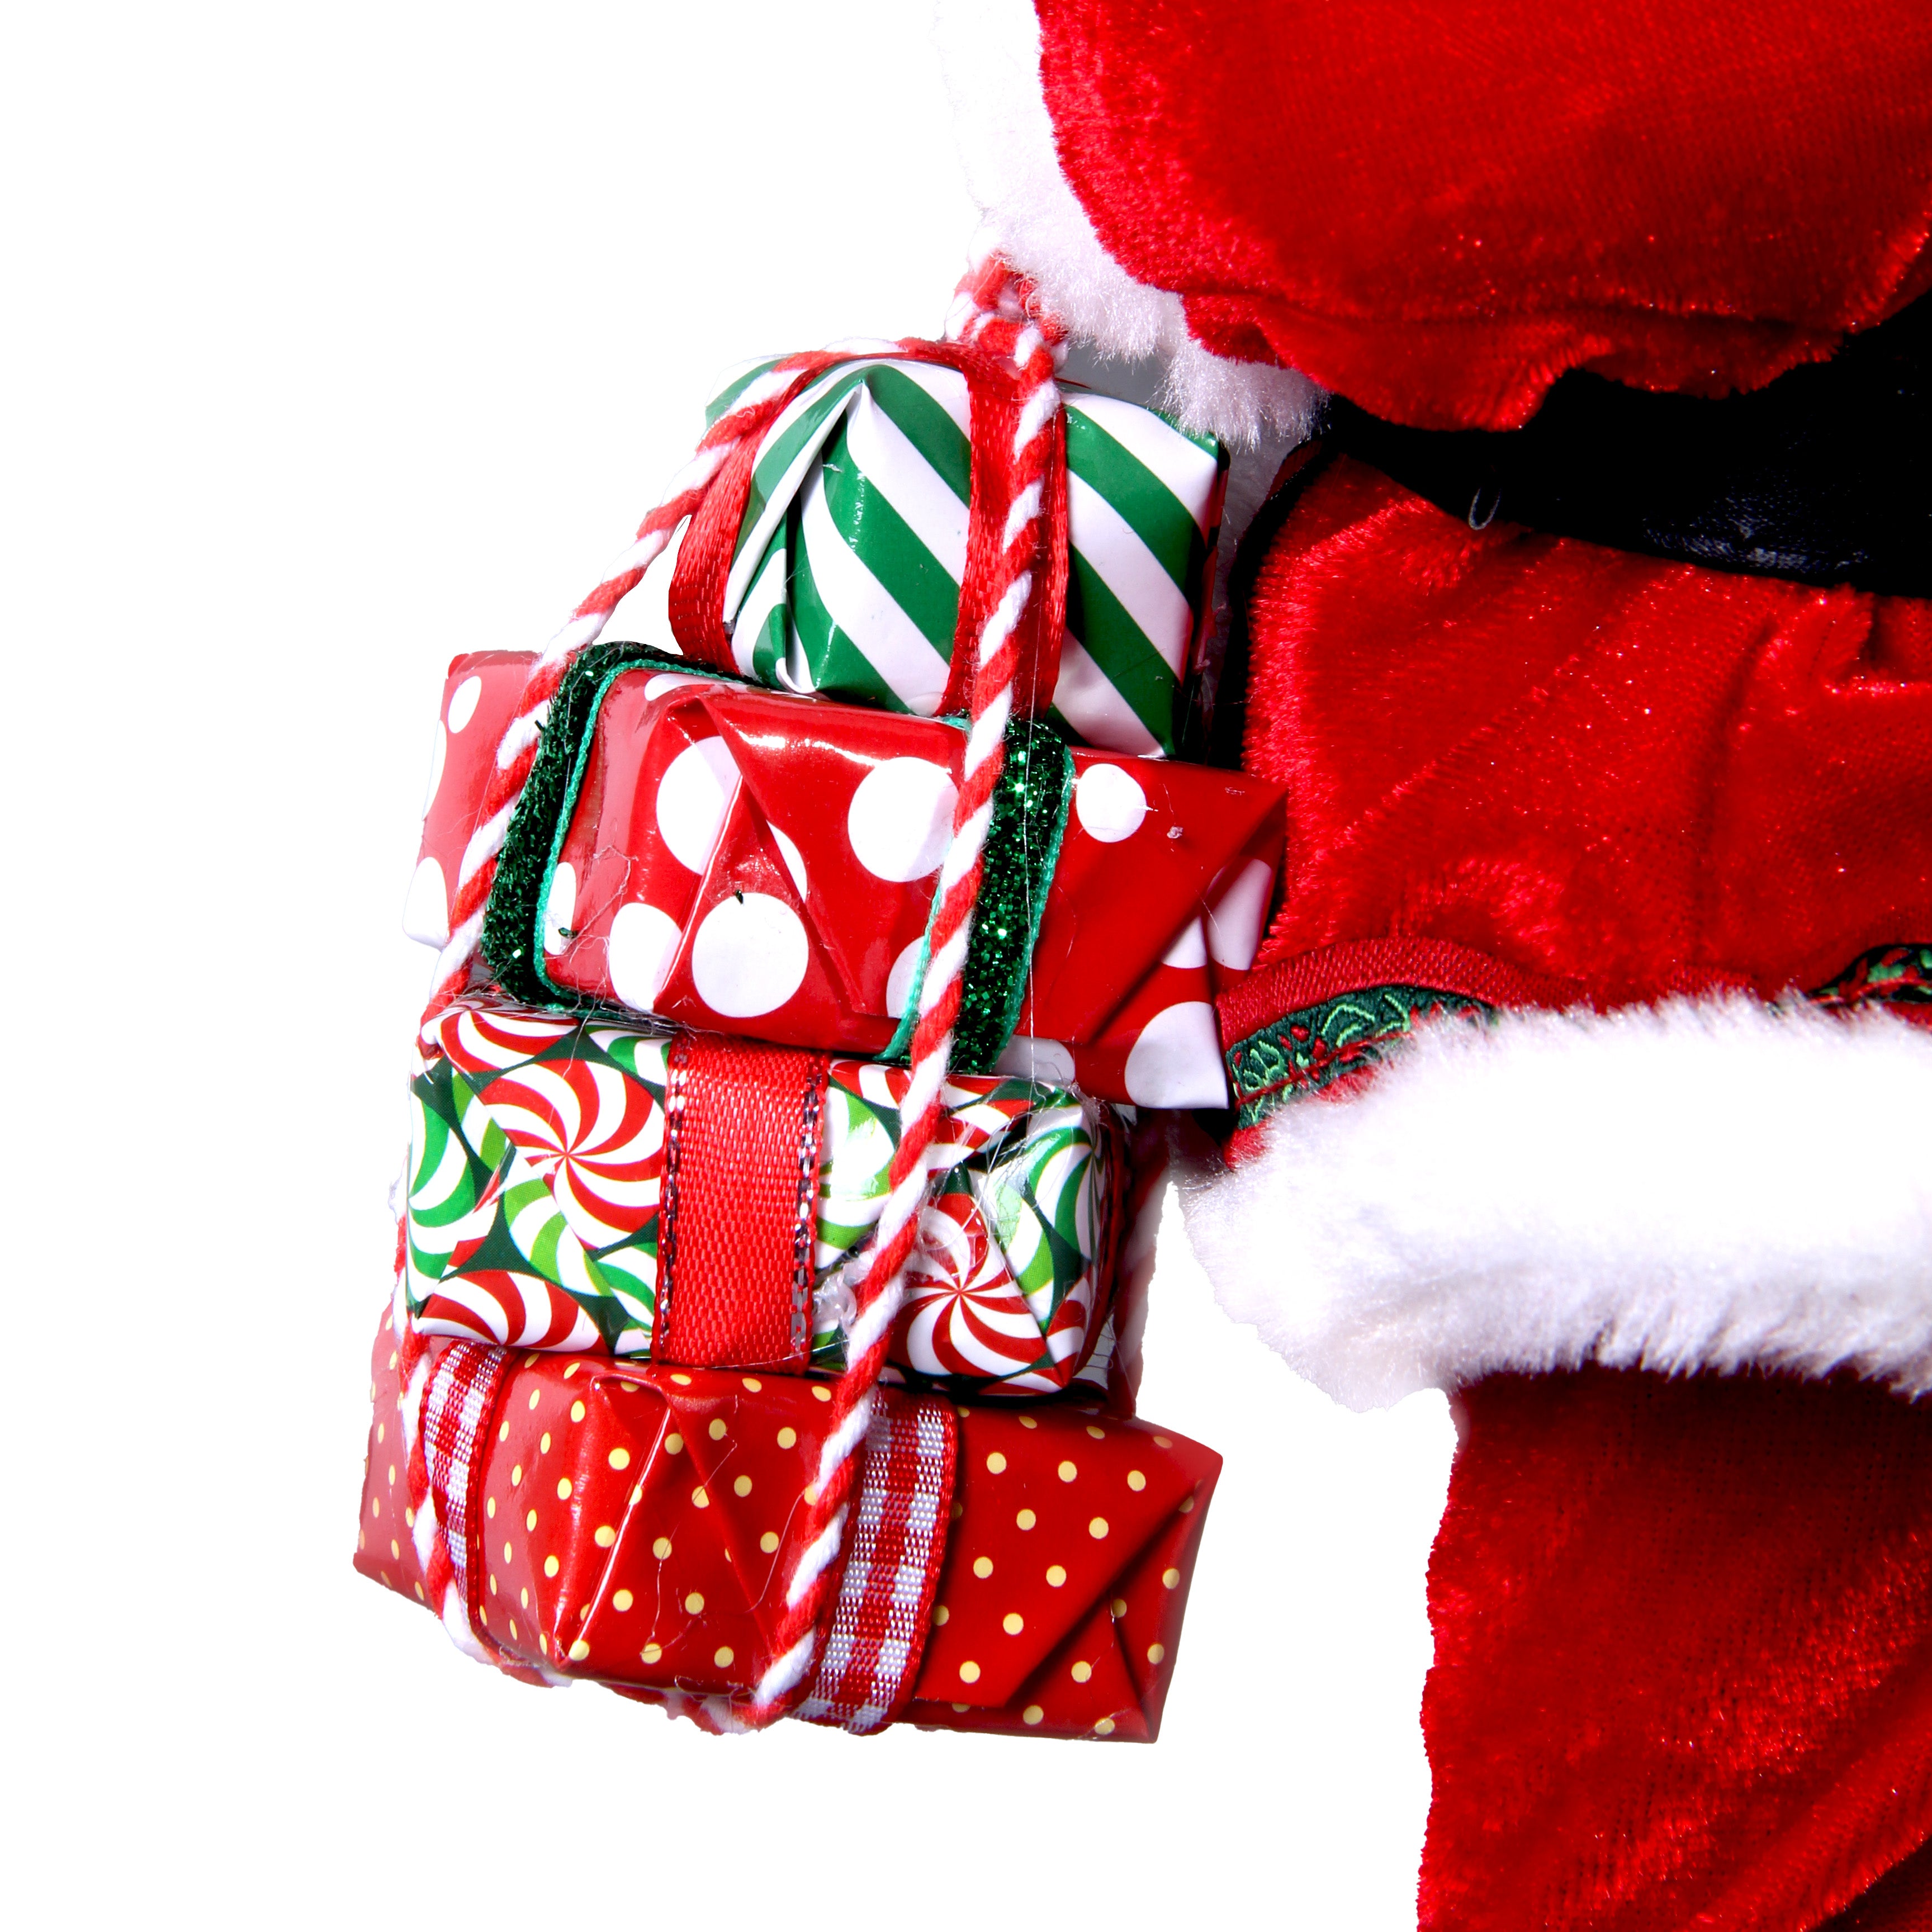 Understanding the Tradition of Secret Santa Gifts